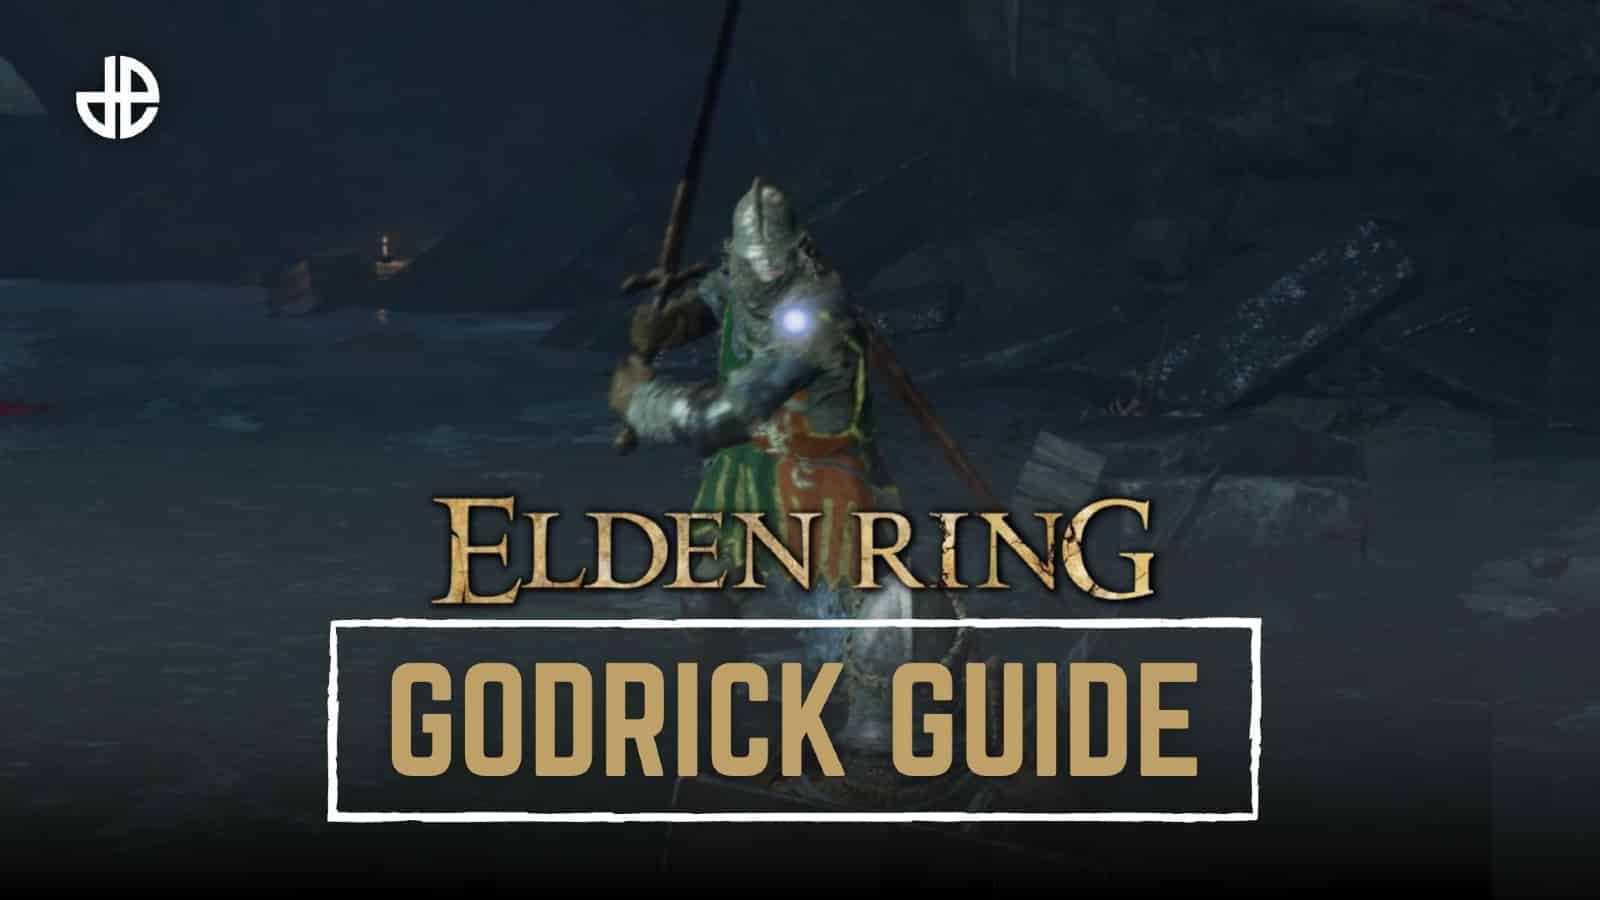 Soldier of godrick guide